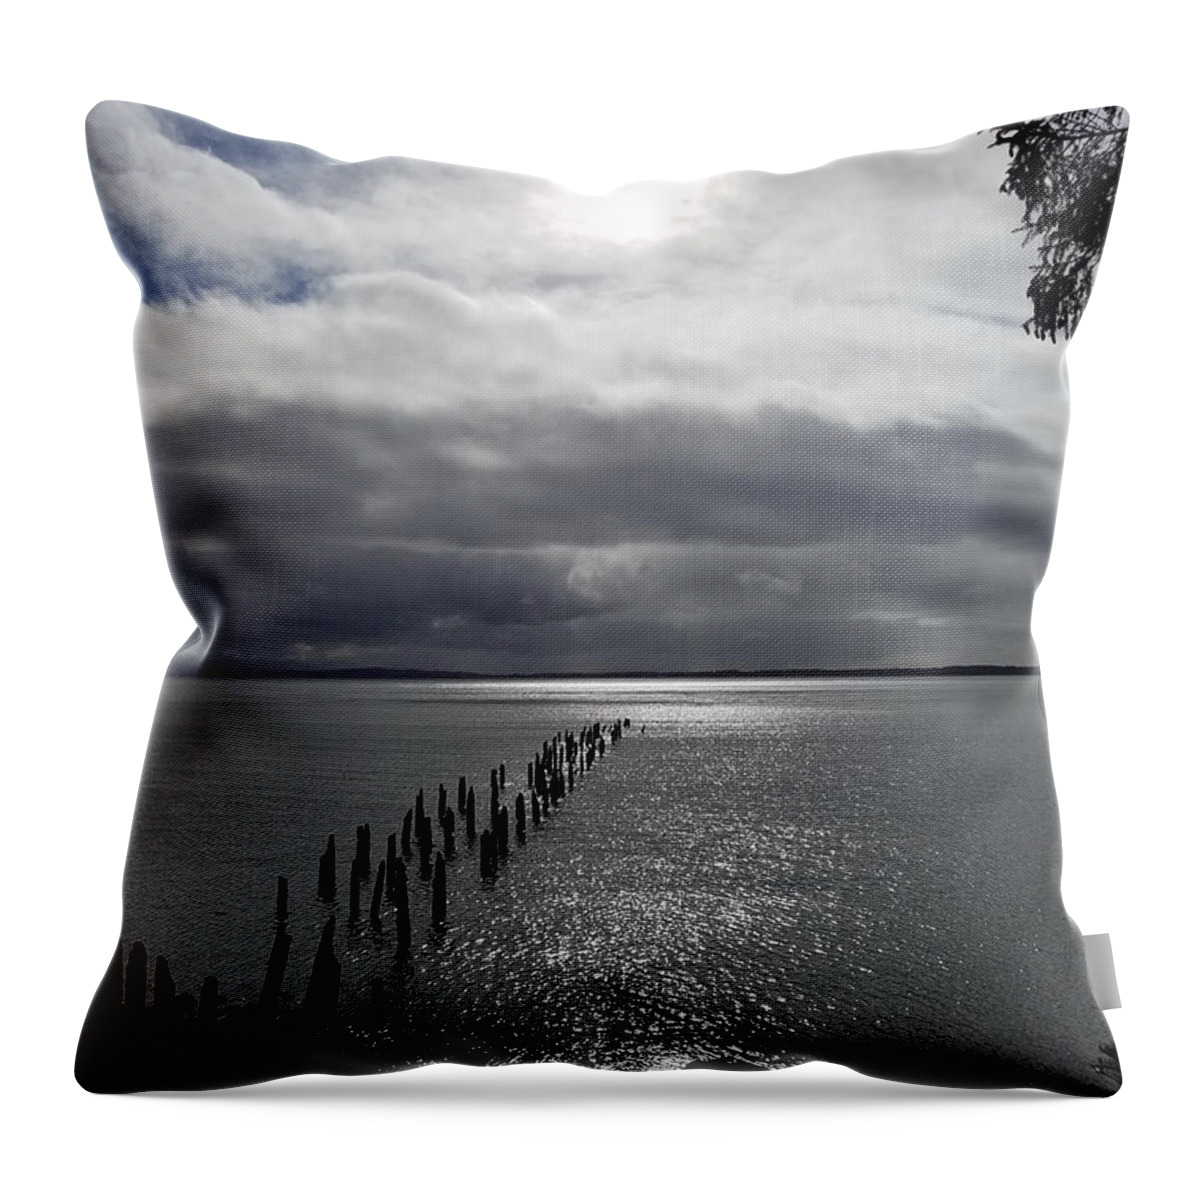 Dock Throw Pillow featuring the photograph Forgotten Dock by Brent Knippel